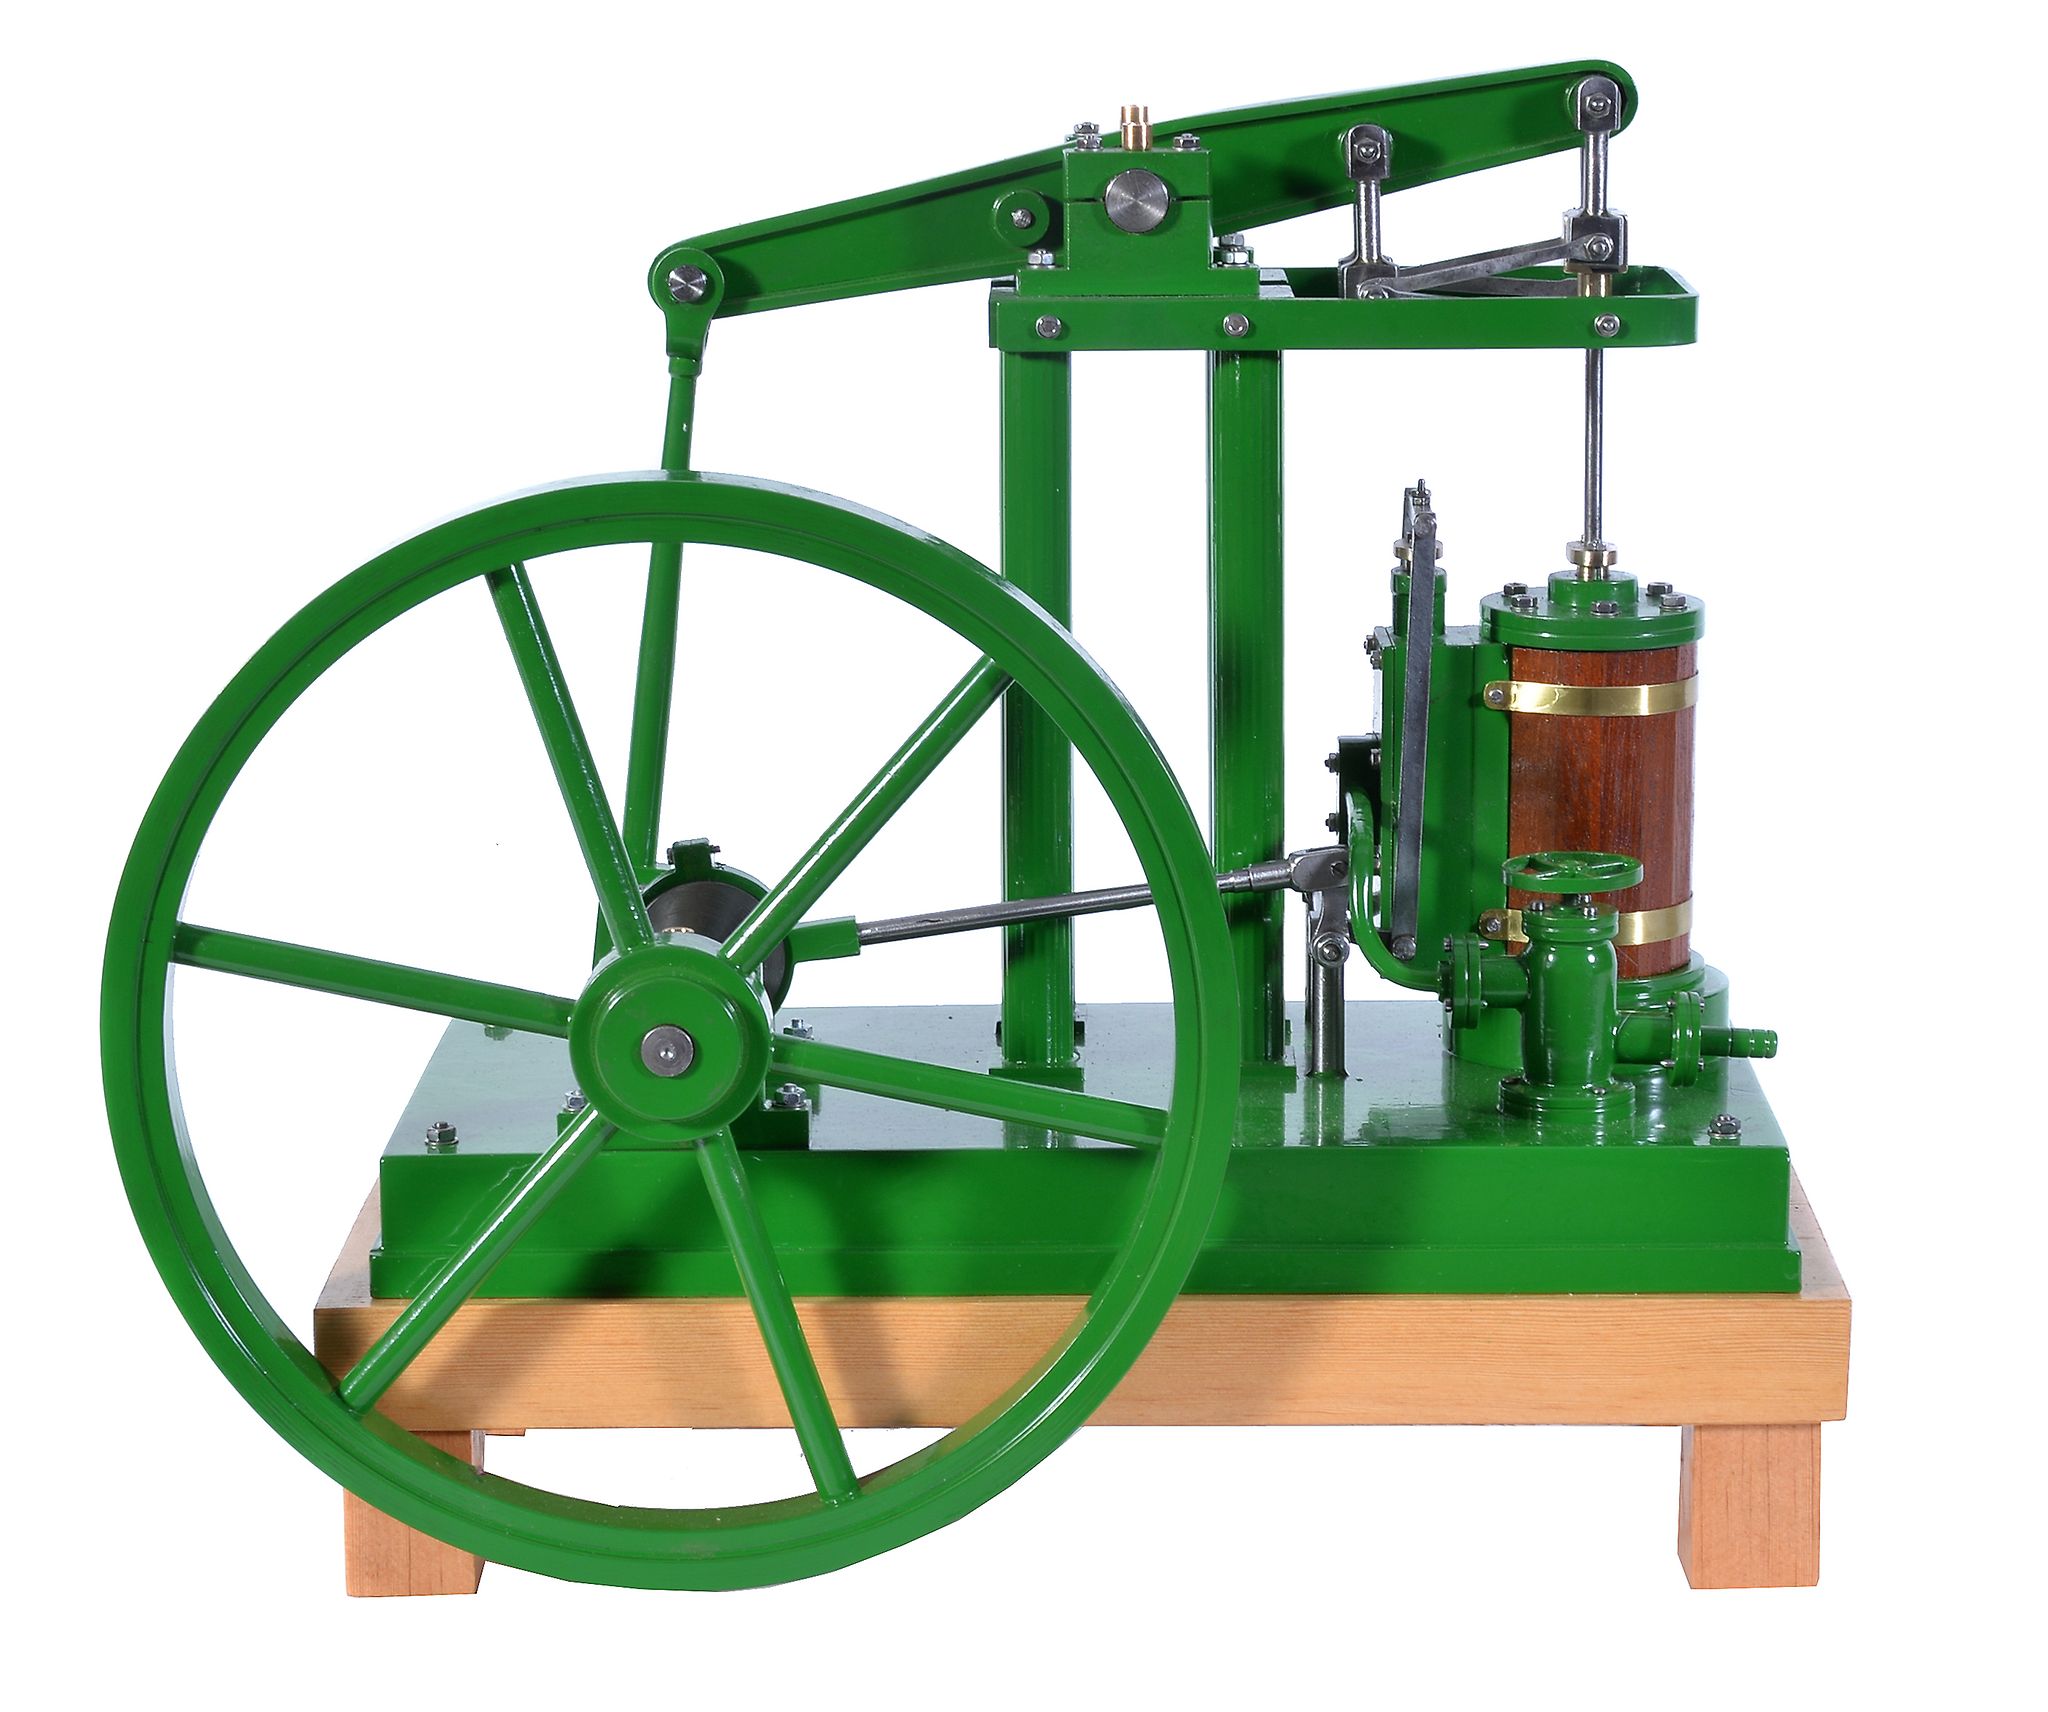 A freelance model of a live steam beam engine, built by Mr D Russell of Frazerburgh. The beam